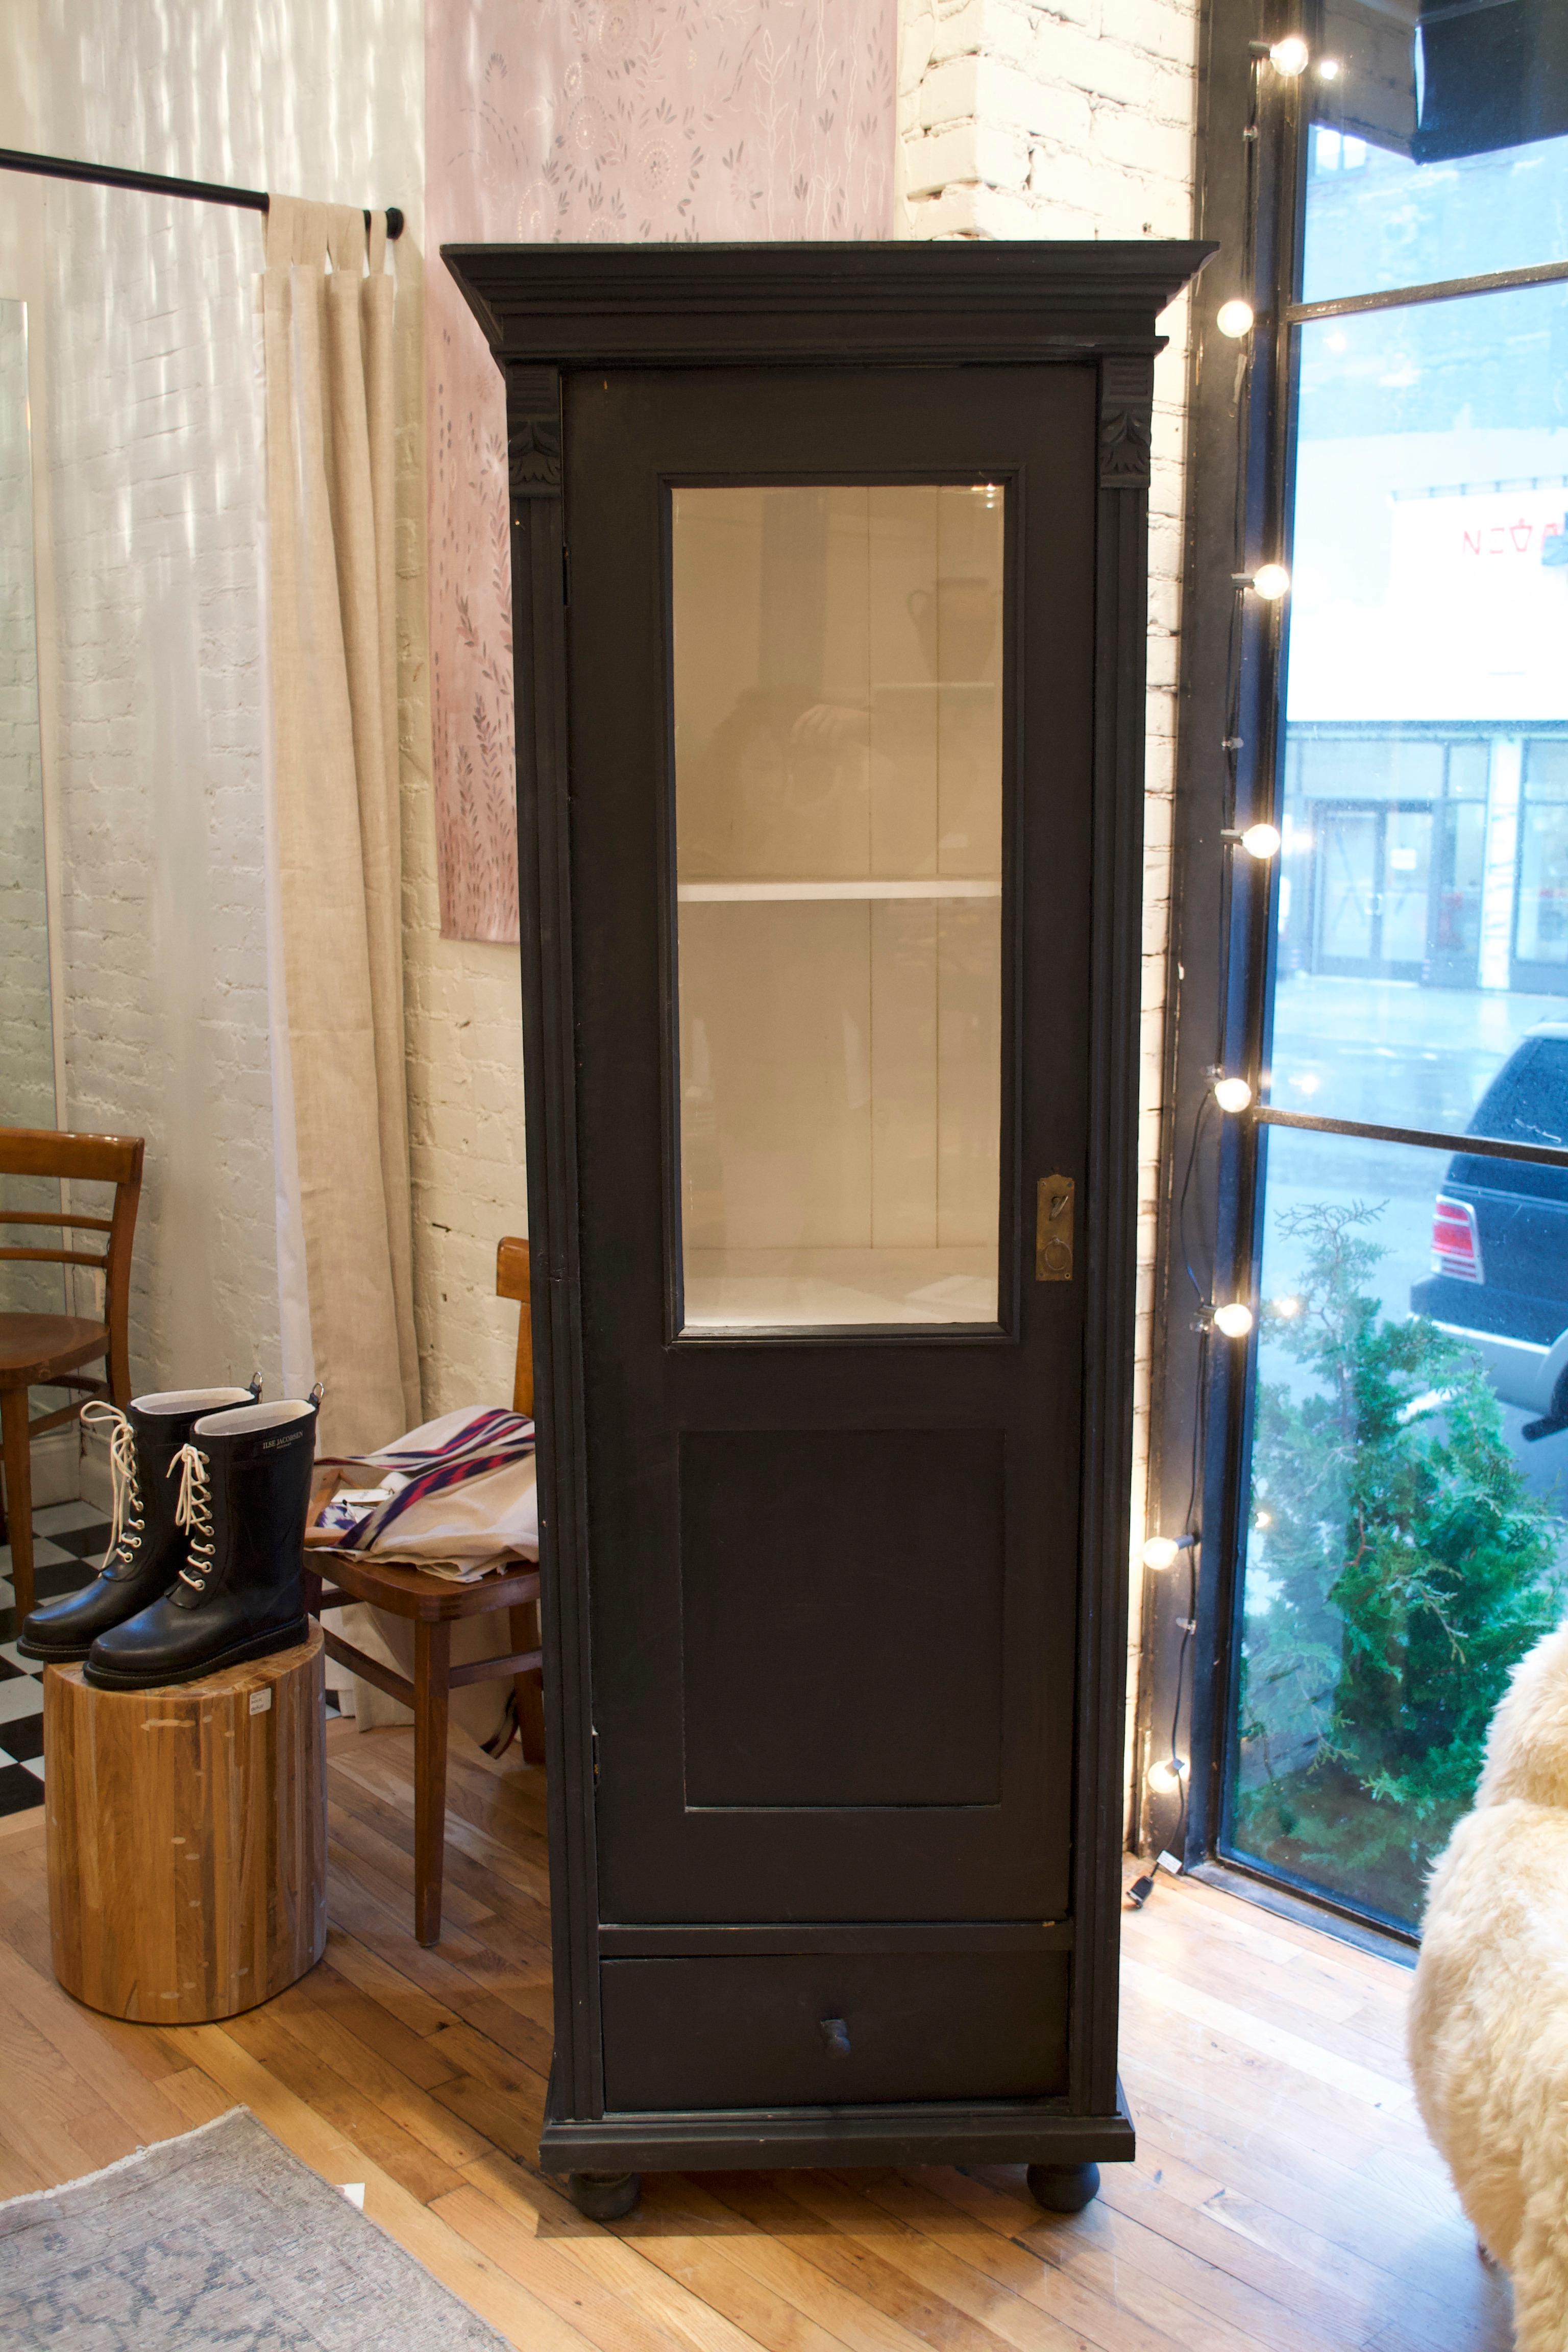 European black painted vitrine with white interior. A great addition to display linens in a countryside bathroom.